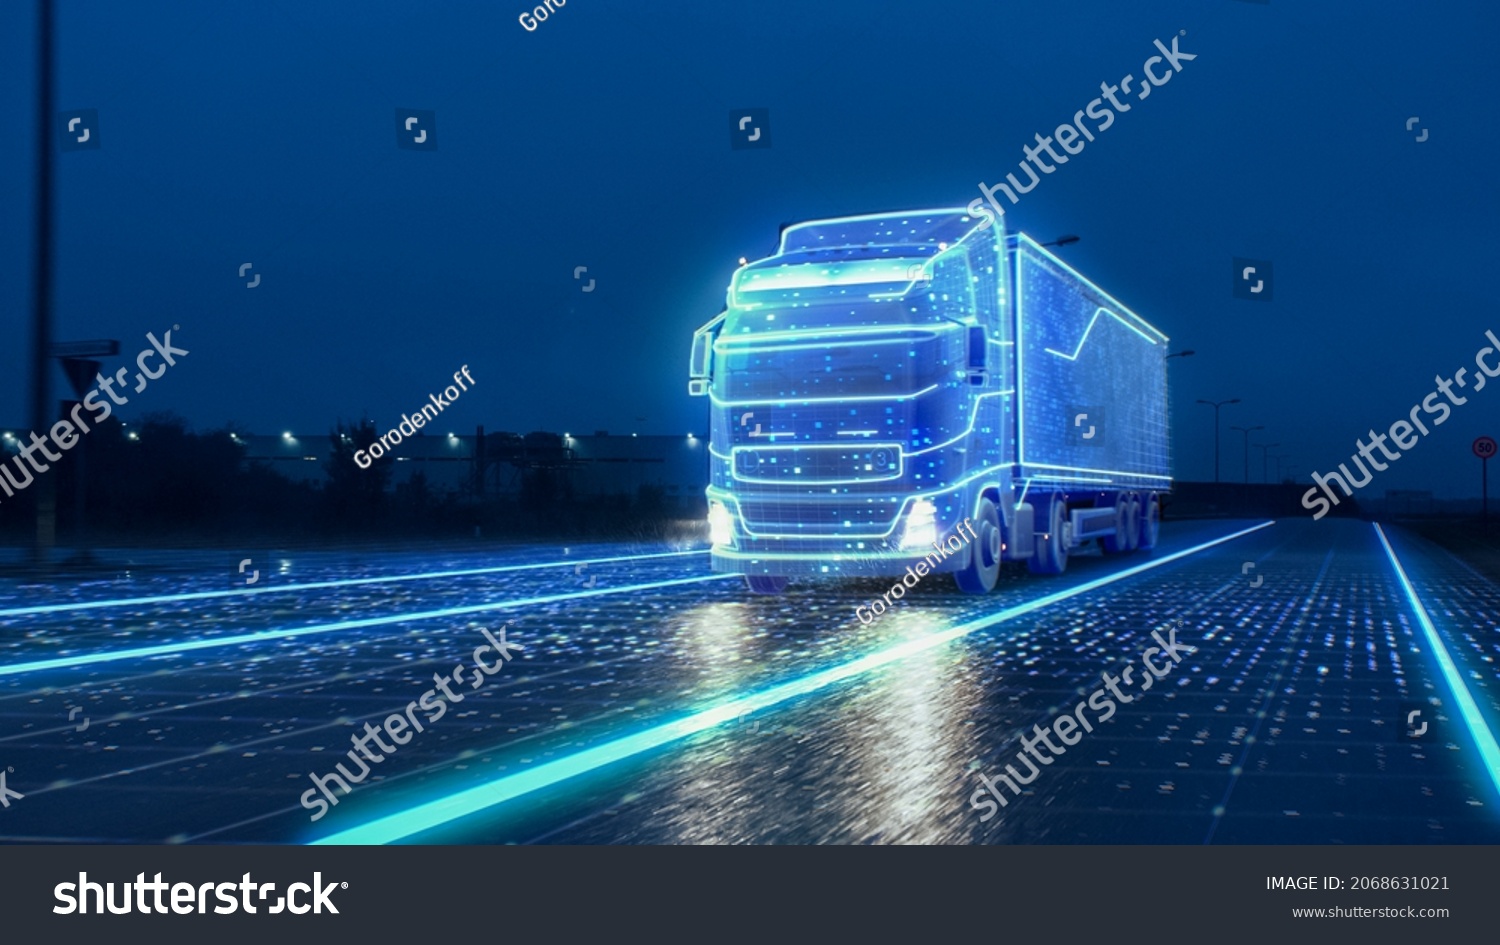 Futuristic Technology Concept: Autonomous Semi Truck with Cargo Trailer Drives at Night on the Road with Sensors Scanning Surrounding. Special Effects of Self Driving Truck Digitalizing Freeway #2068631021